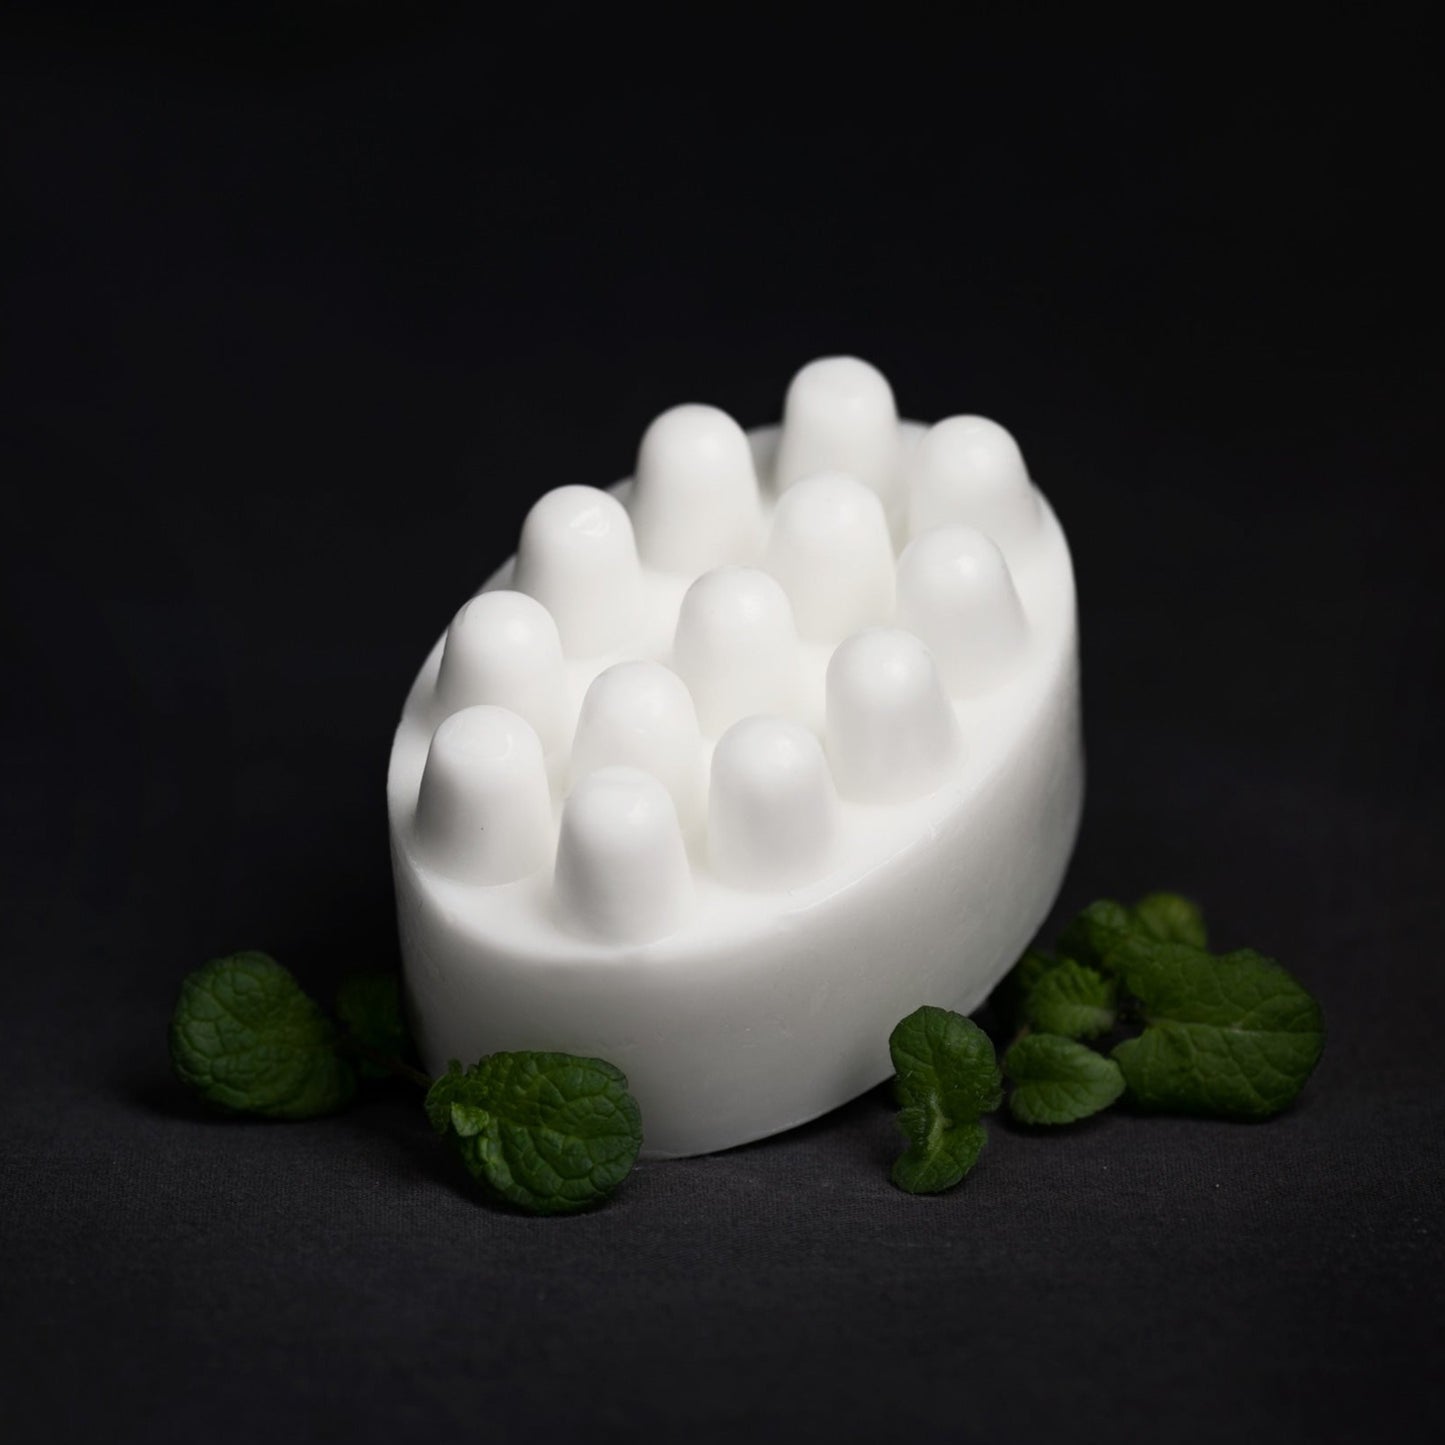 a white bar of soap with massage bumps, surrounded by mint leaves on a black surface